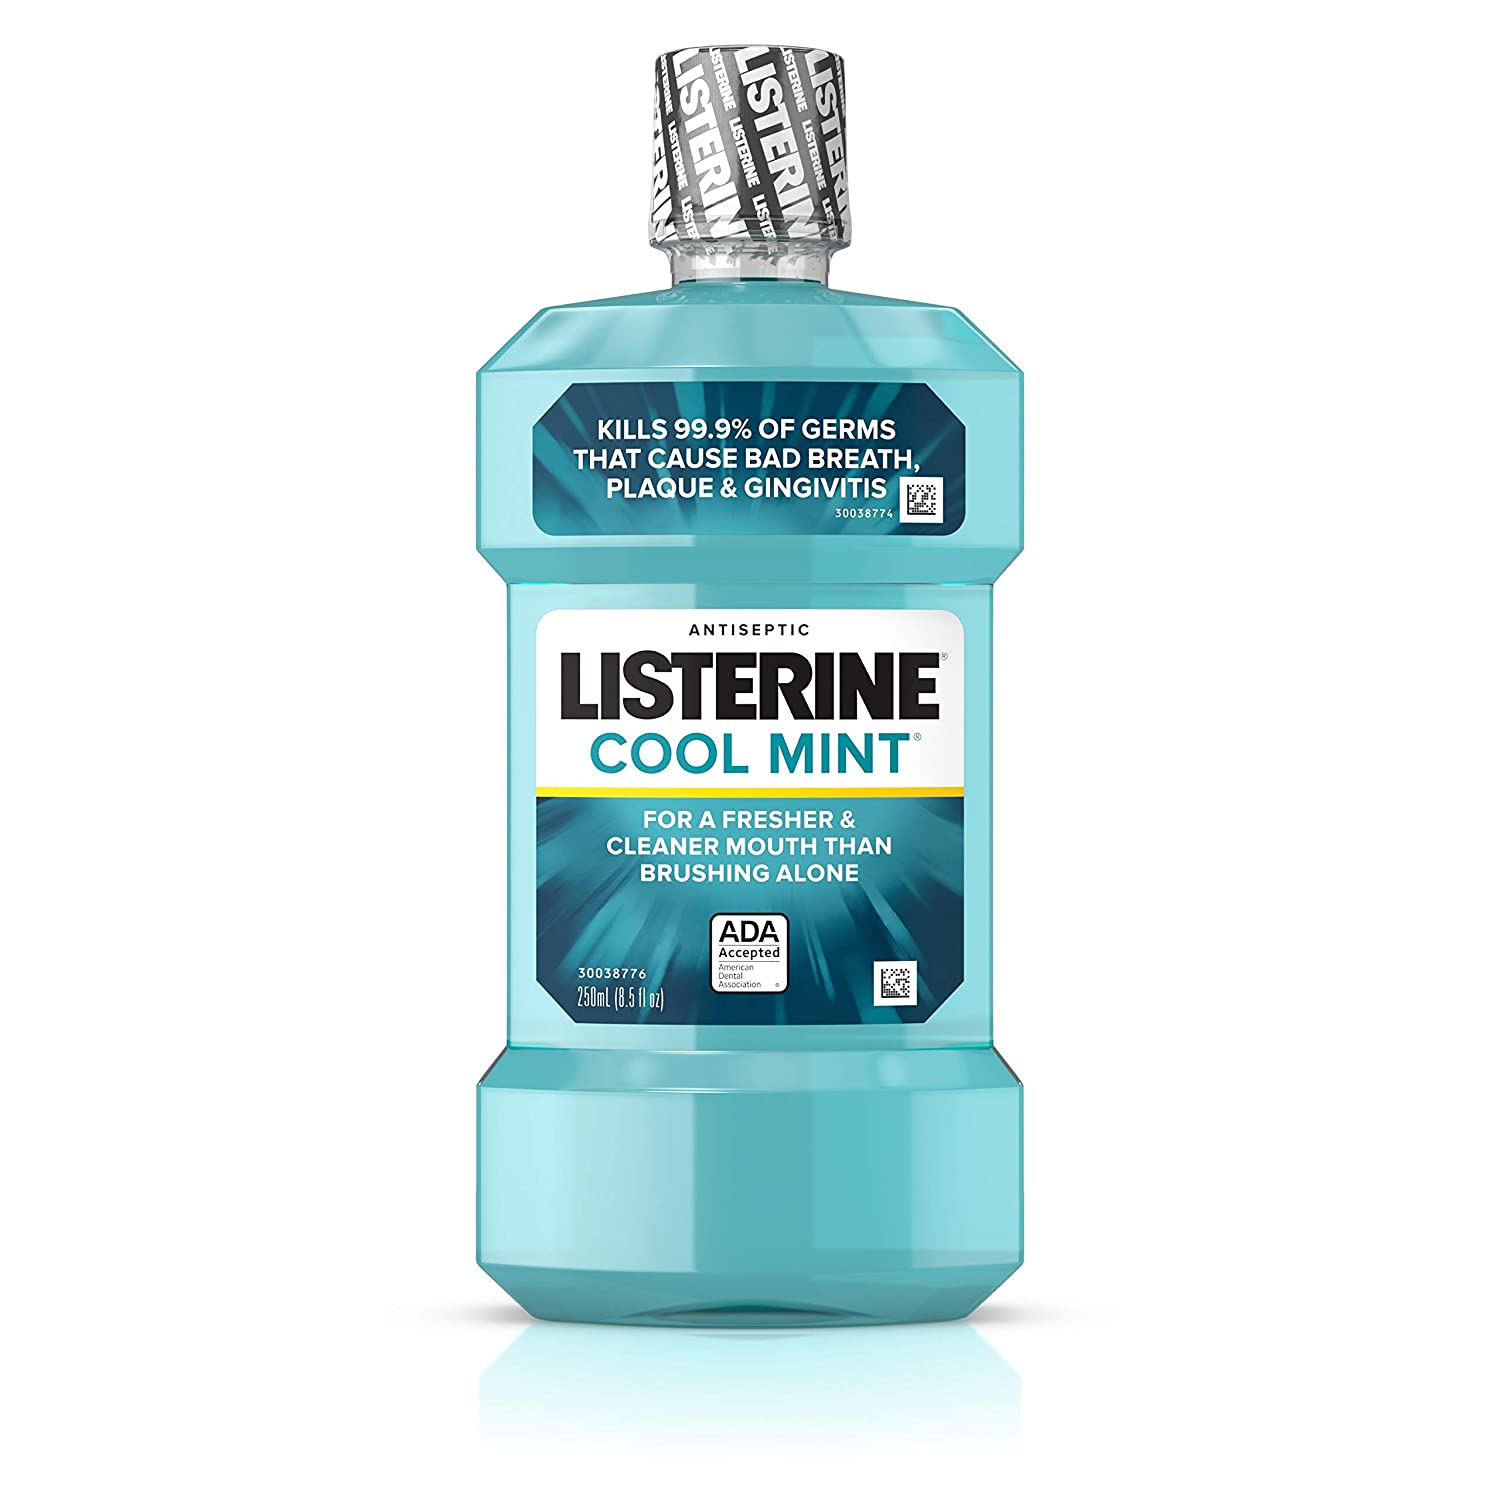 250ml Listerine Antiseptic Oral Care Mouthwash (Cool Mint or Freshburst) $2.10 w/ S&S + Free Shipping w/ Prime or $25+